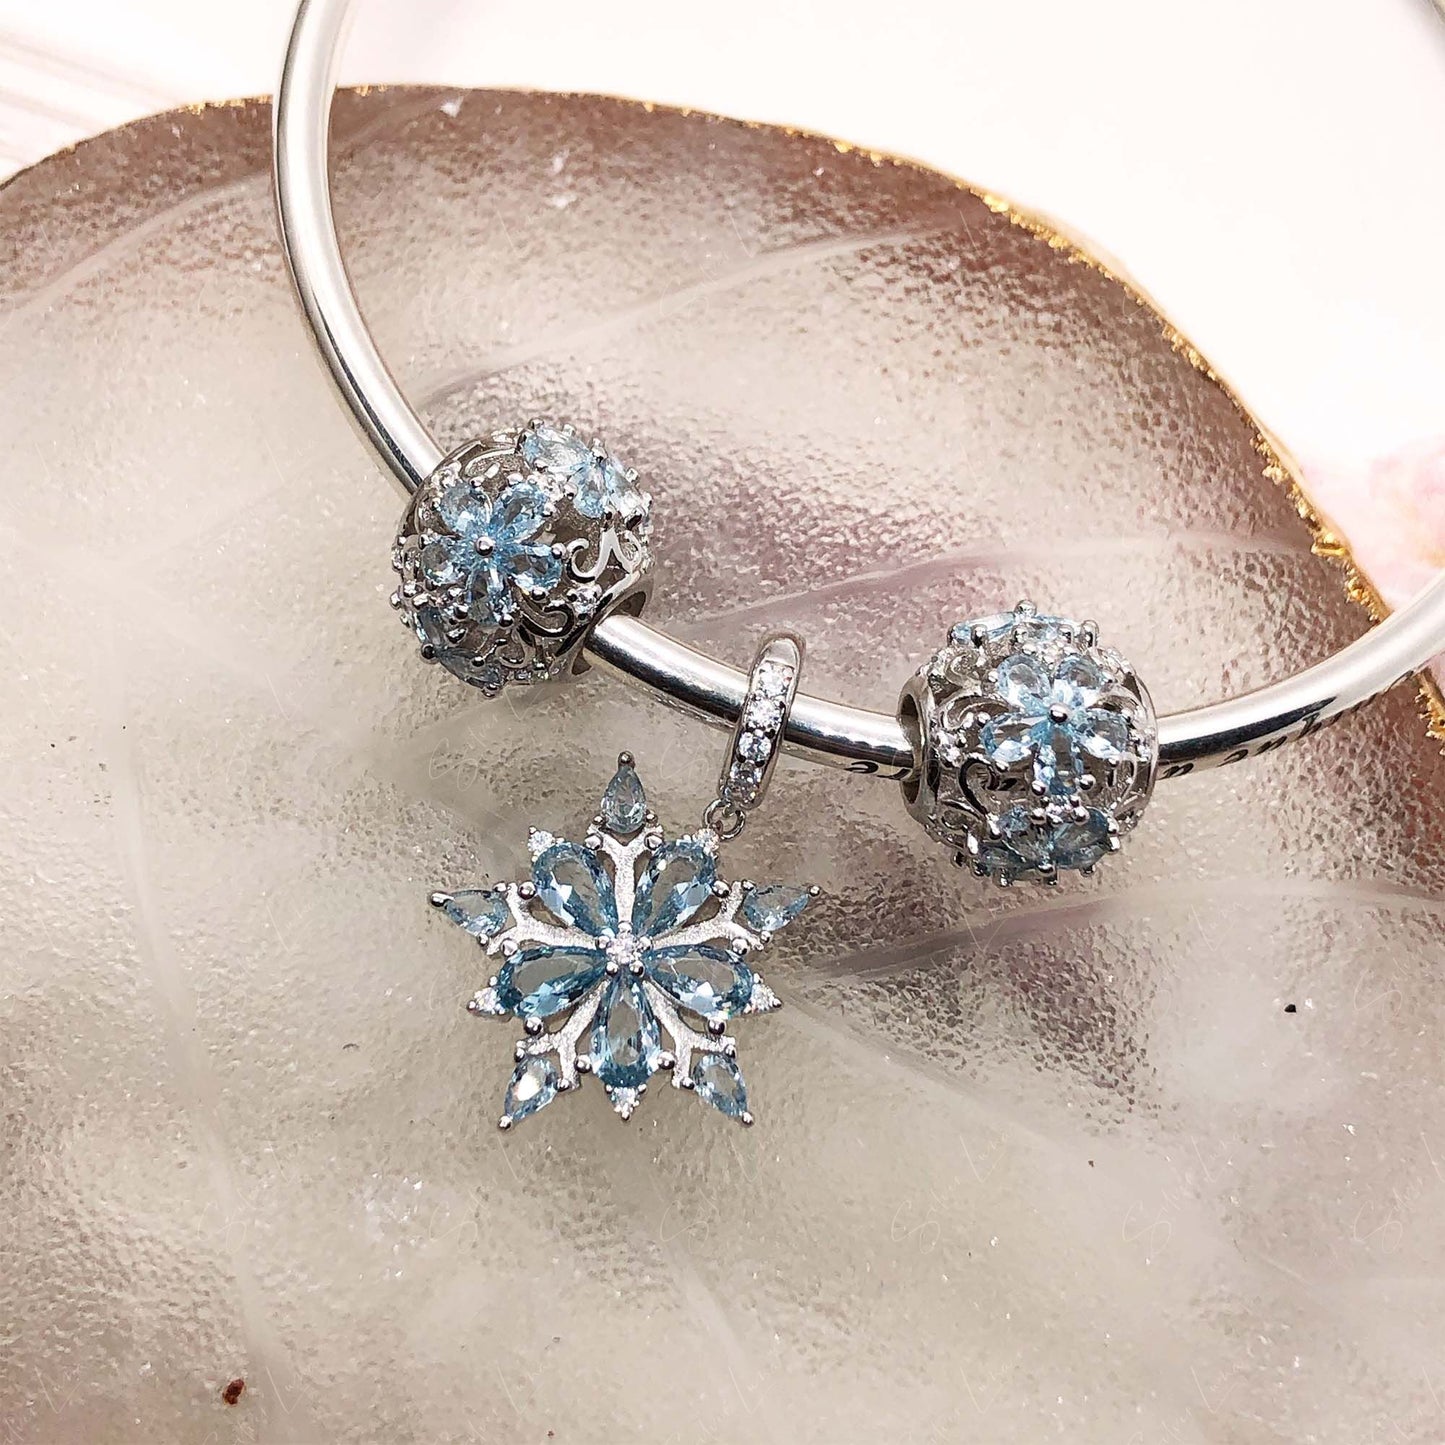 Set of 3 snowflake sterling silver charms for bracelet